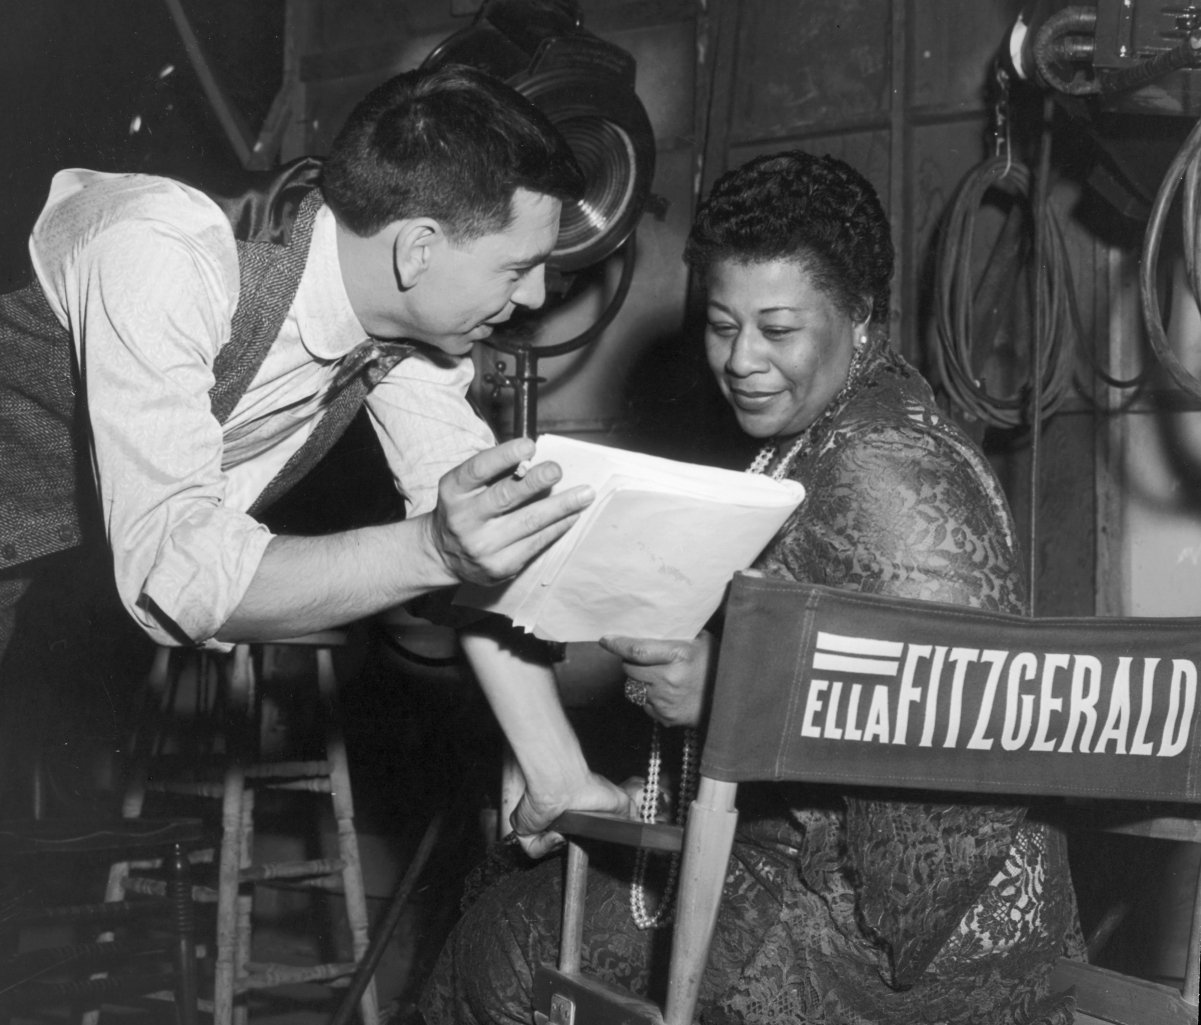 American actor and director Jack Webb discusses a script with American jazz singer Ella Fitzgerald behind the scenes, possibly on the set of Webb's film, 'Pete Kelly's Blues,' in which Fitzgerald had a role, 1955